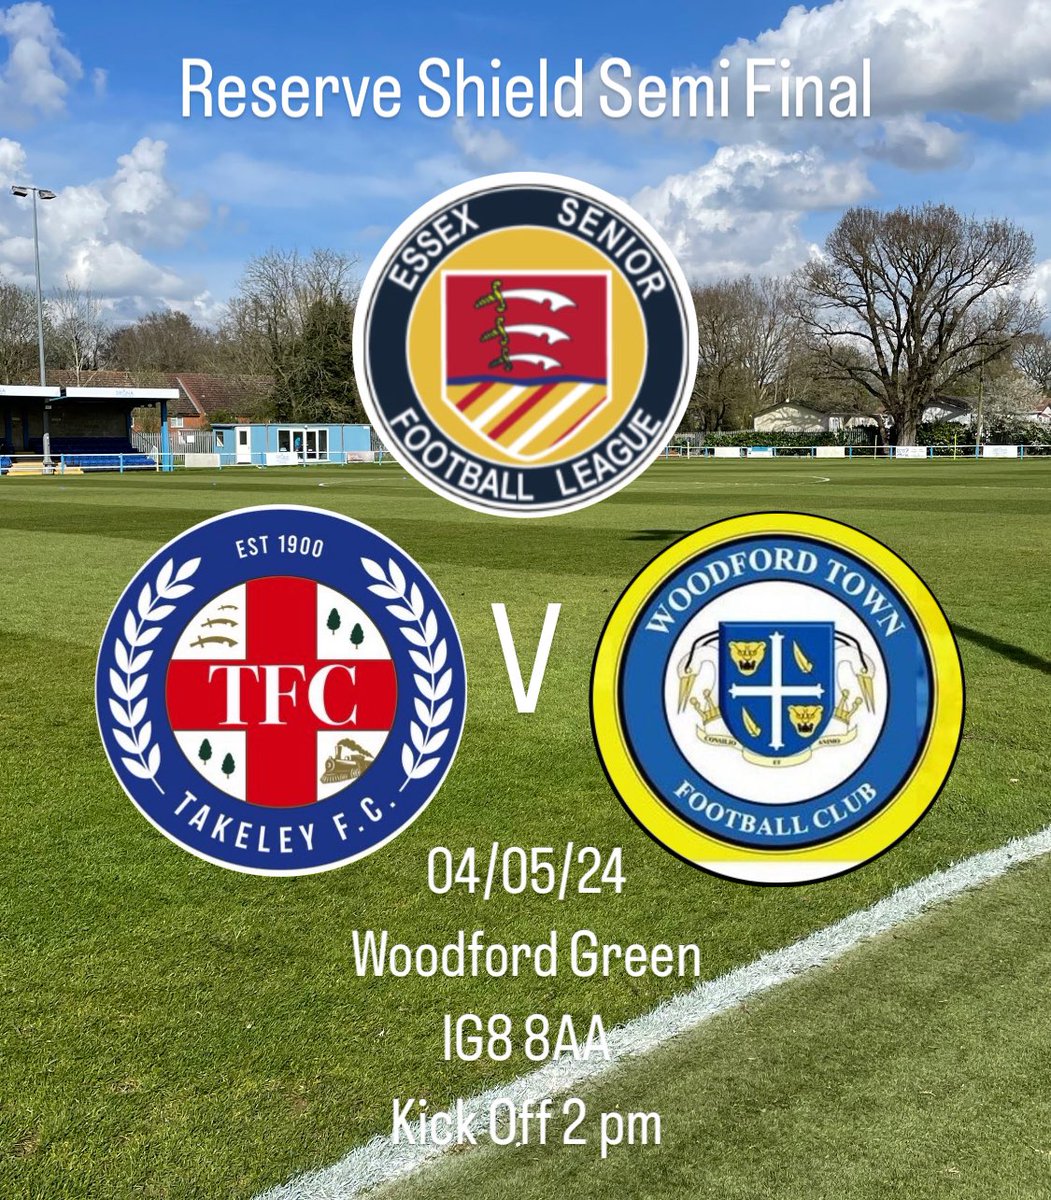 The First XI season may have finished but there is still at least one game left for the Reserves as we travel to @WoodfordtownFCR in the @EssexSenior League for the Reserve Shield Semi Final KO 2 pm